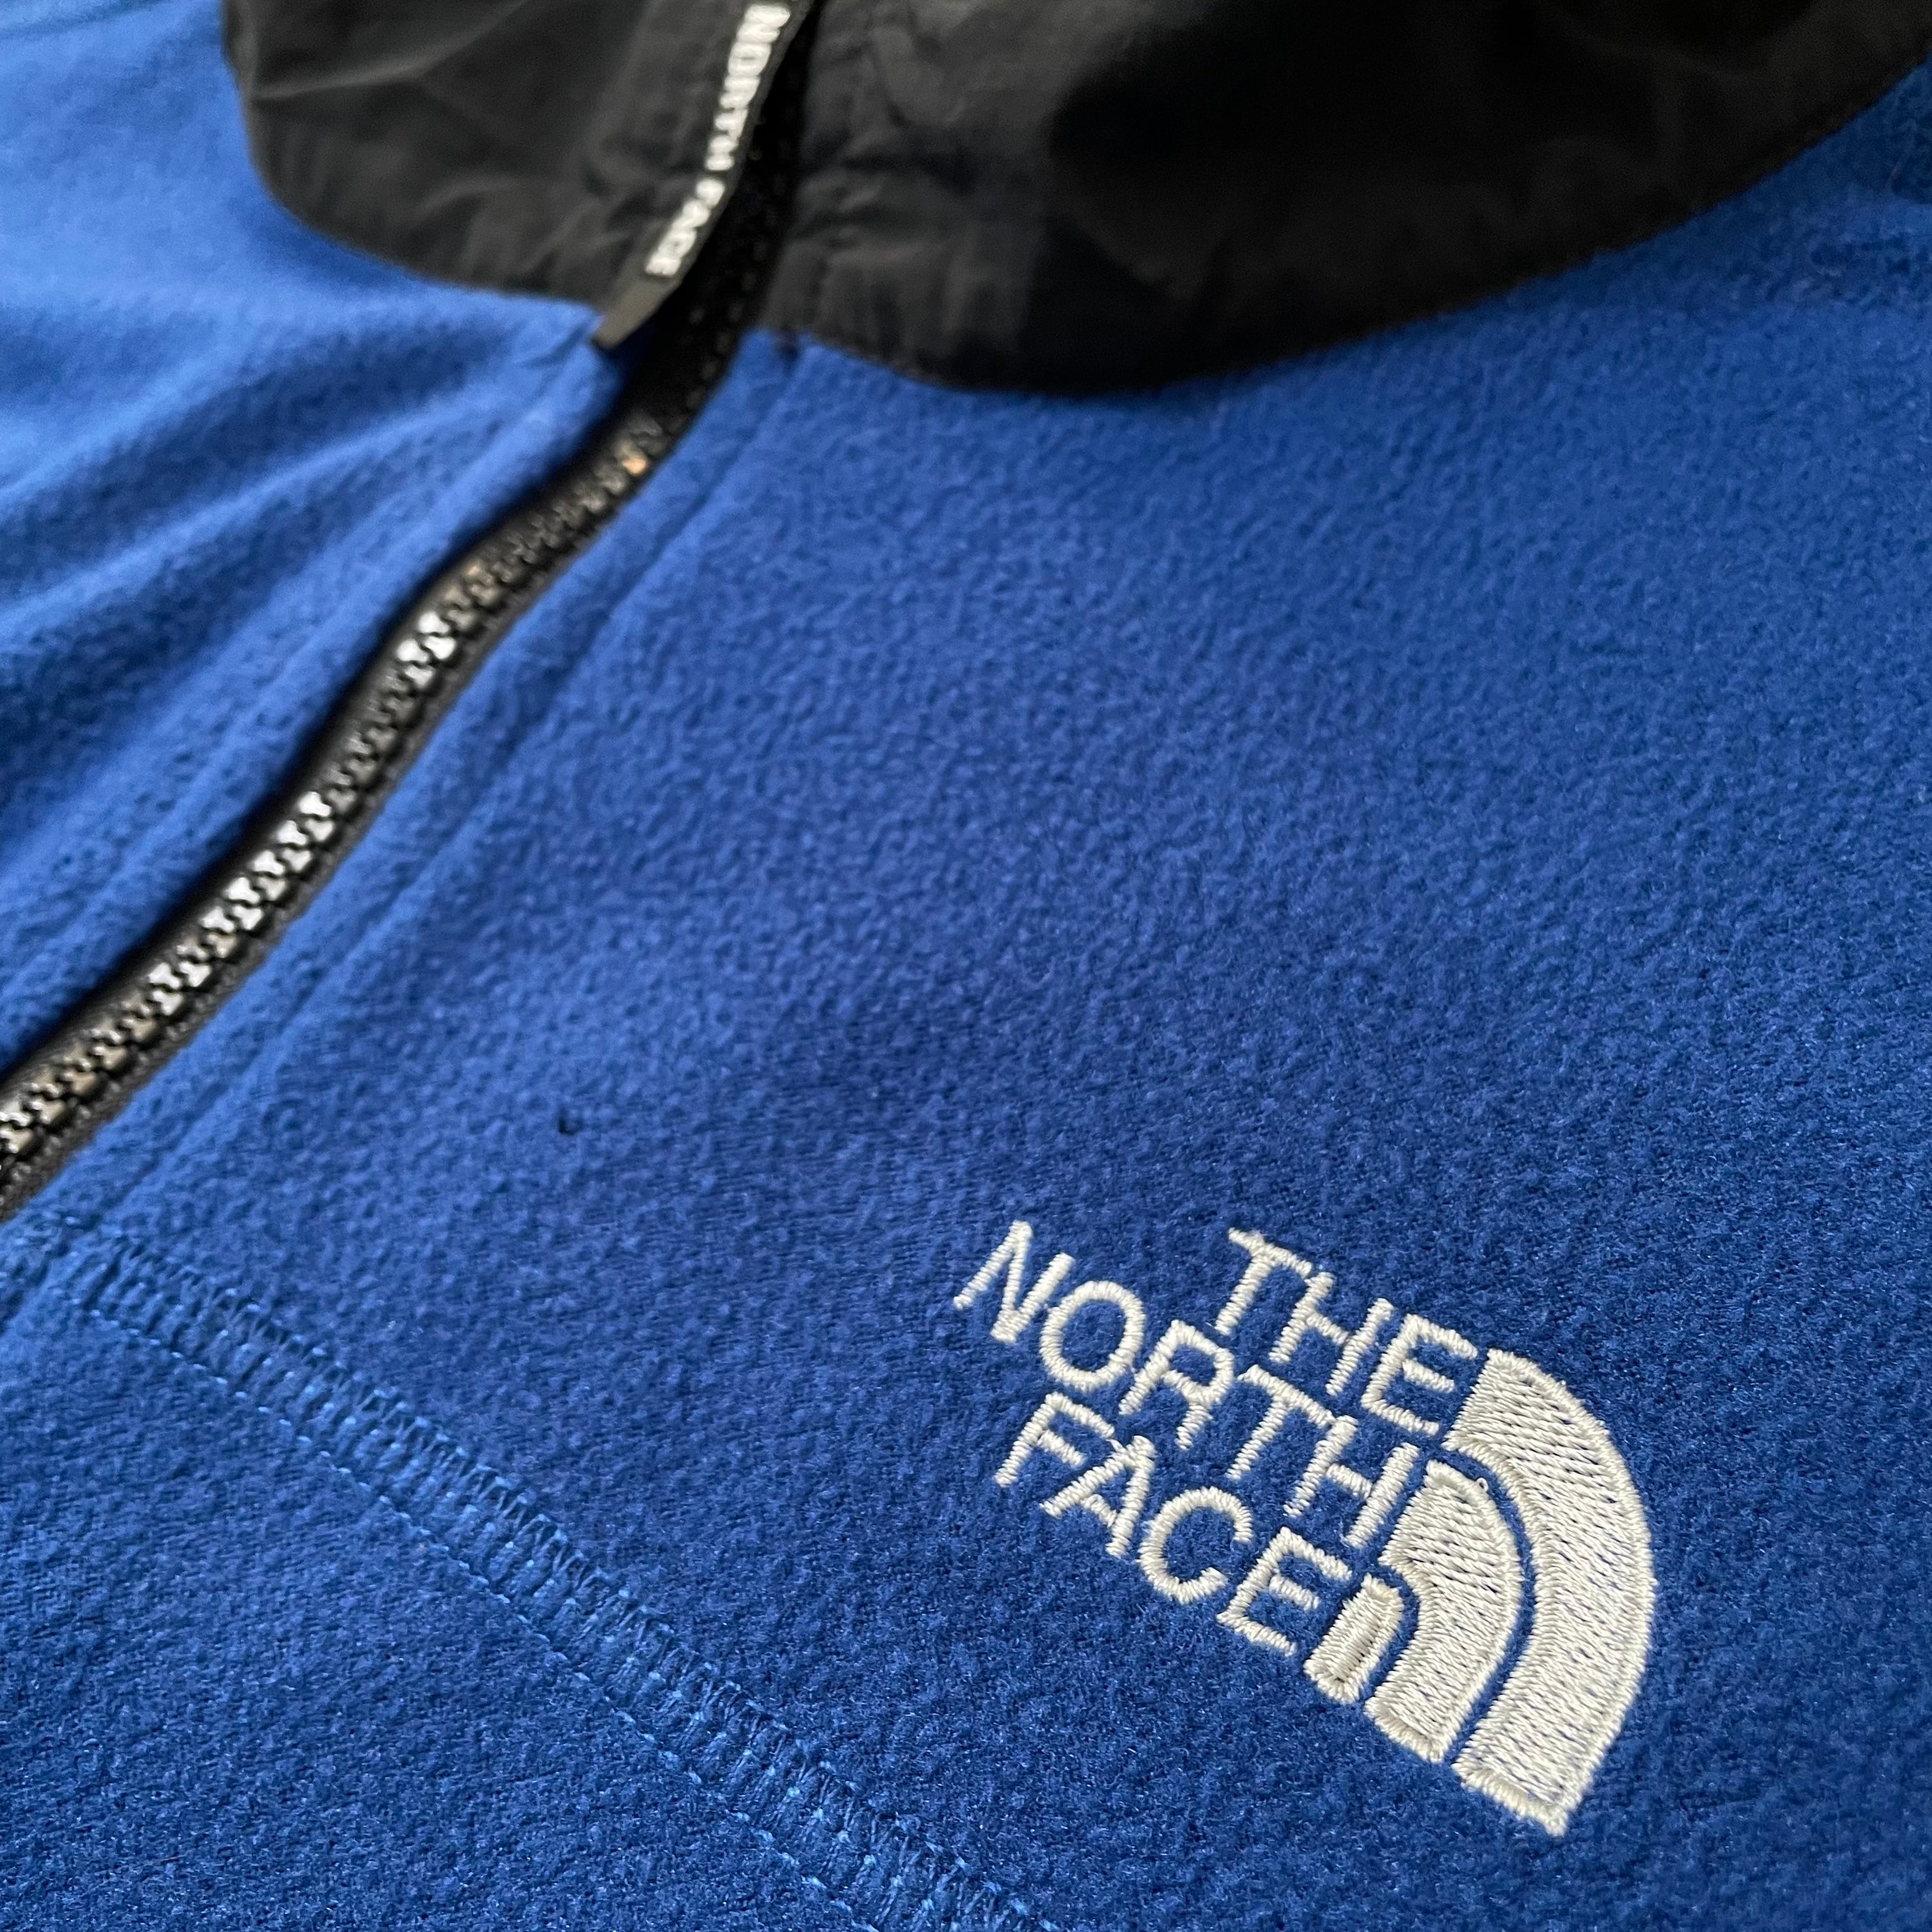 THE NORTH FACE】USA製 フリース デナリジャケット 中間着 ワン